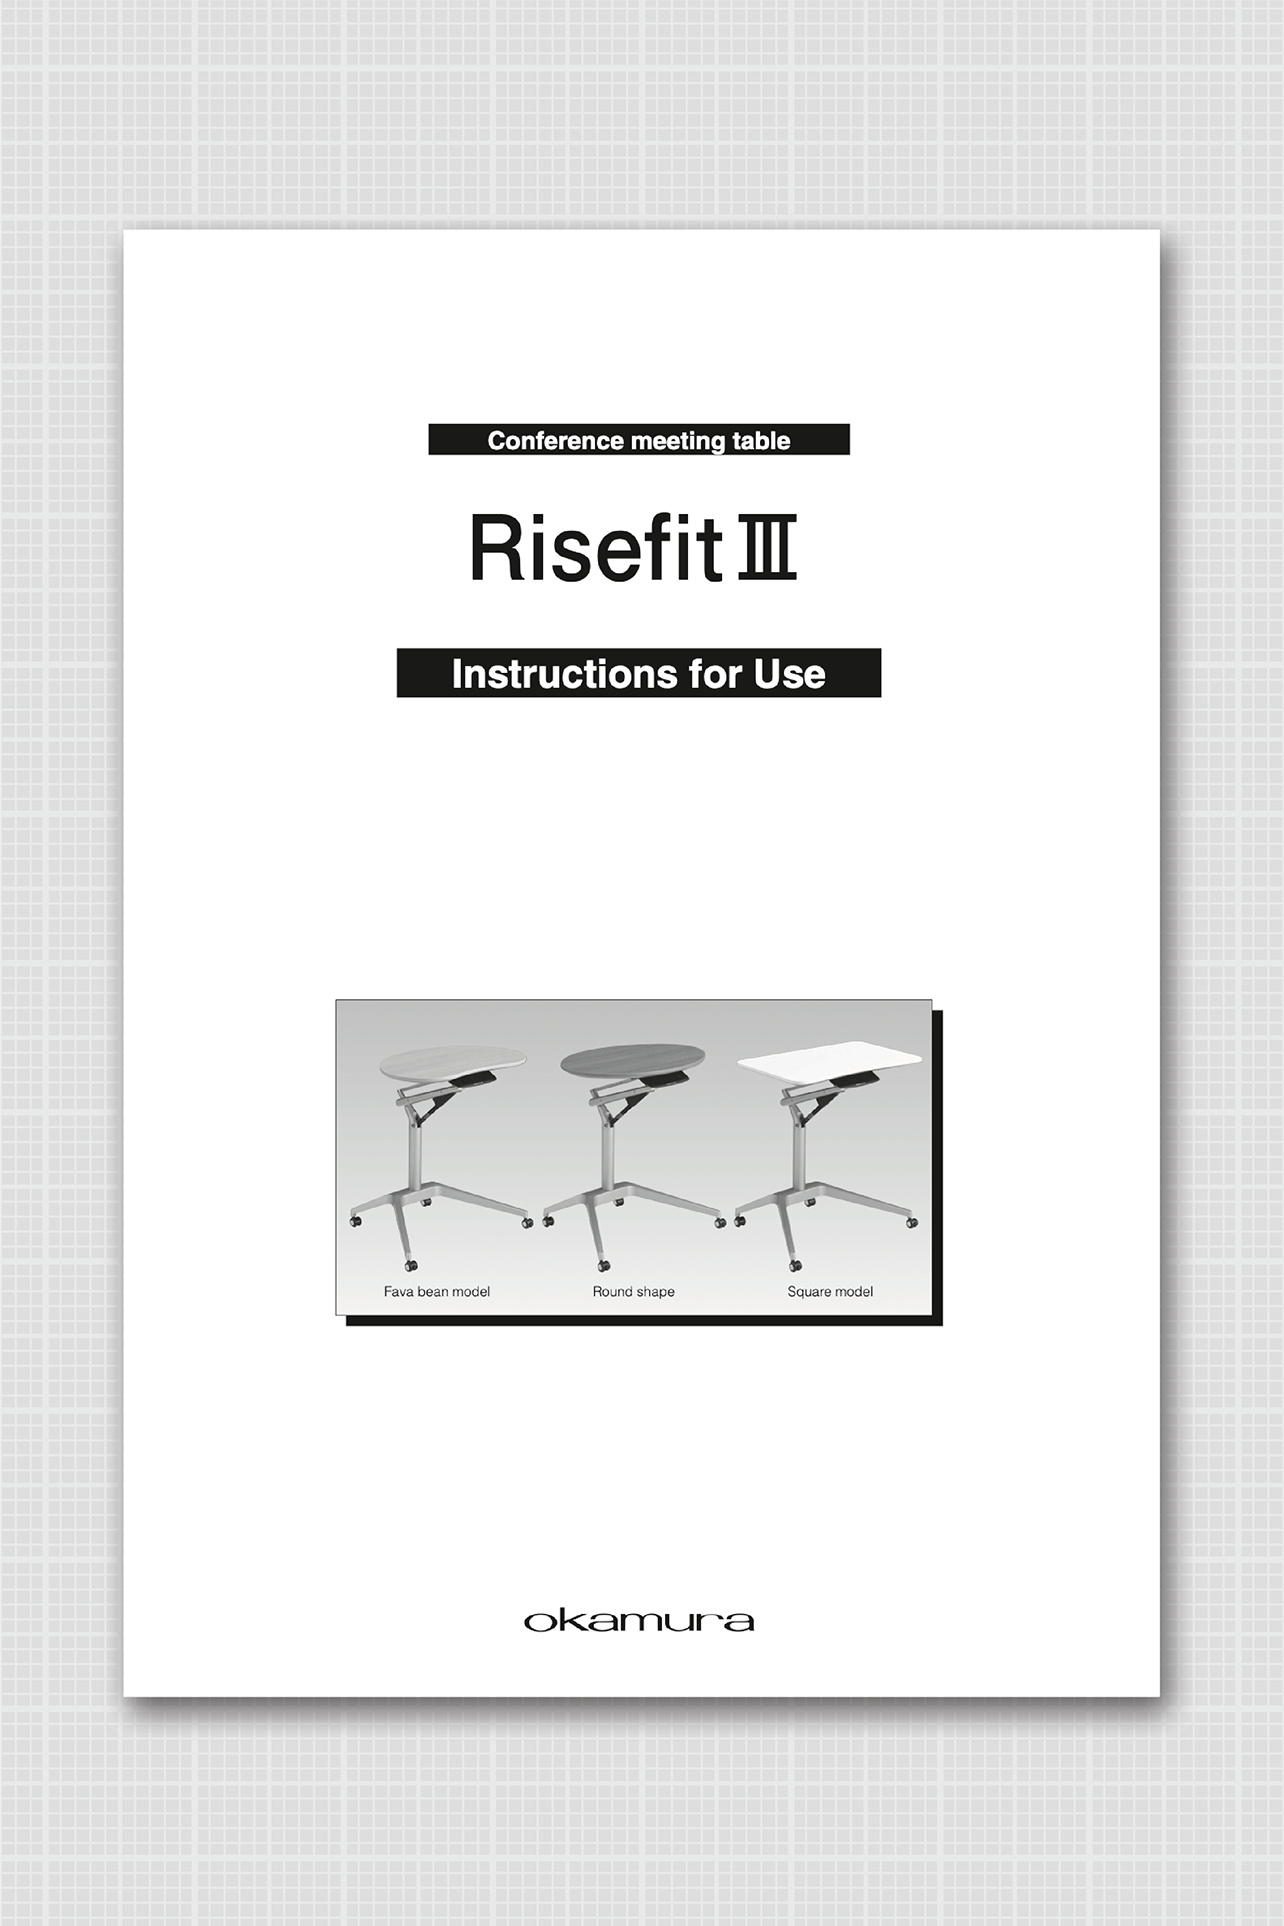 Risefit III Instructions for Use